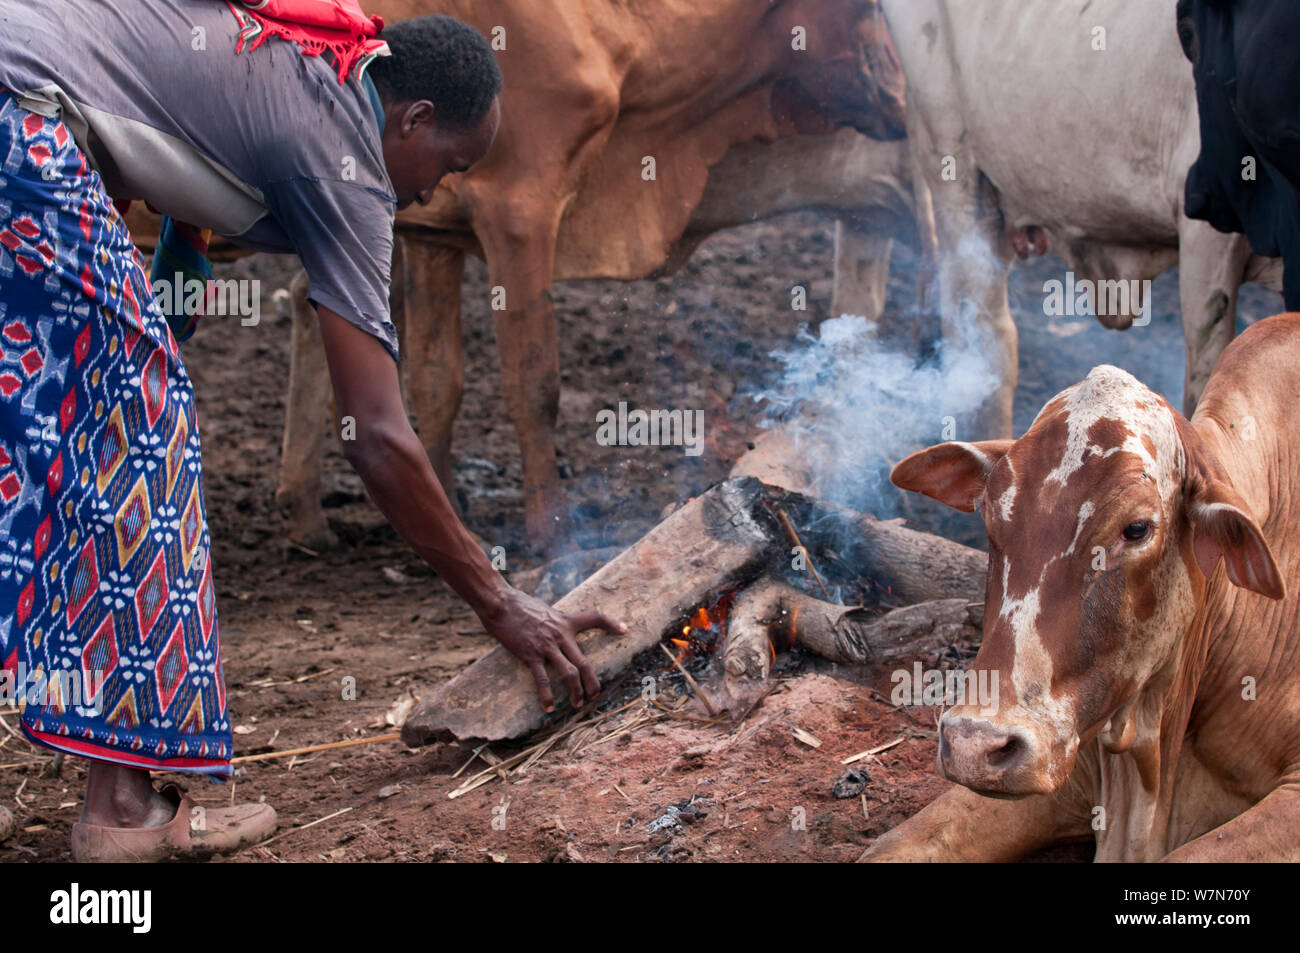 Orma village, pastoralist tribe woman keeping fire going as smoke keeps flies and mosquitoes away from livestock, Tana River delta, Kenya, East Africa 2010 Stock Photo